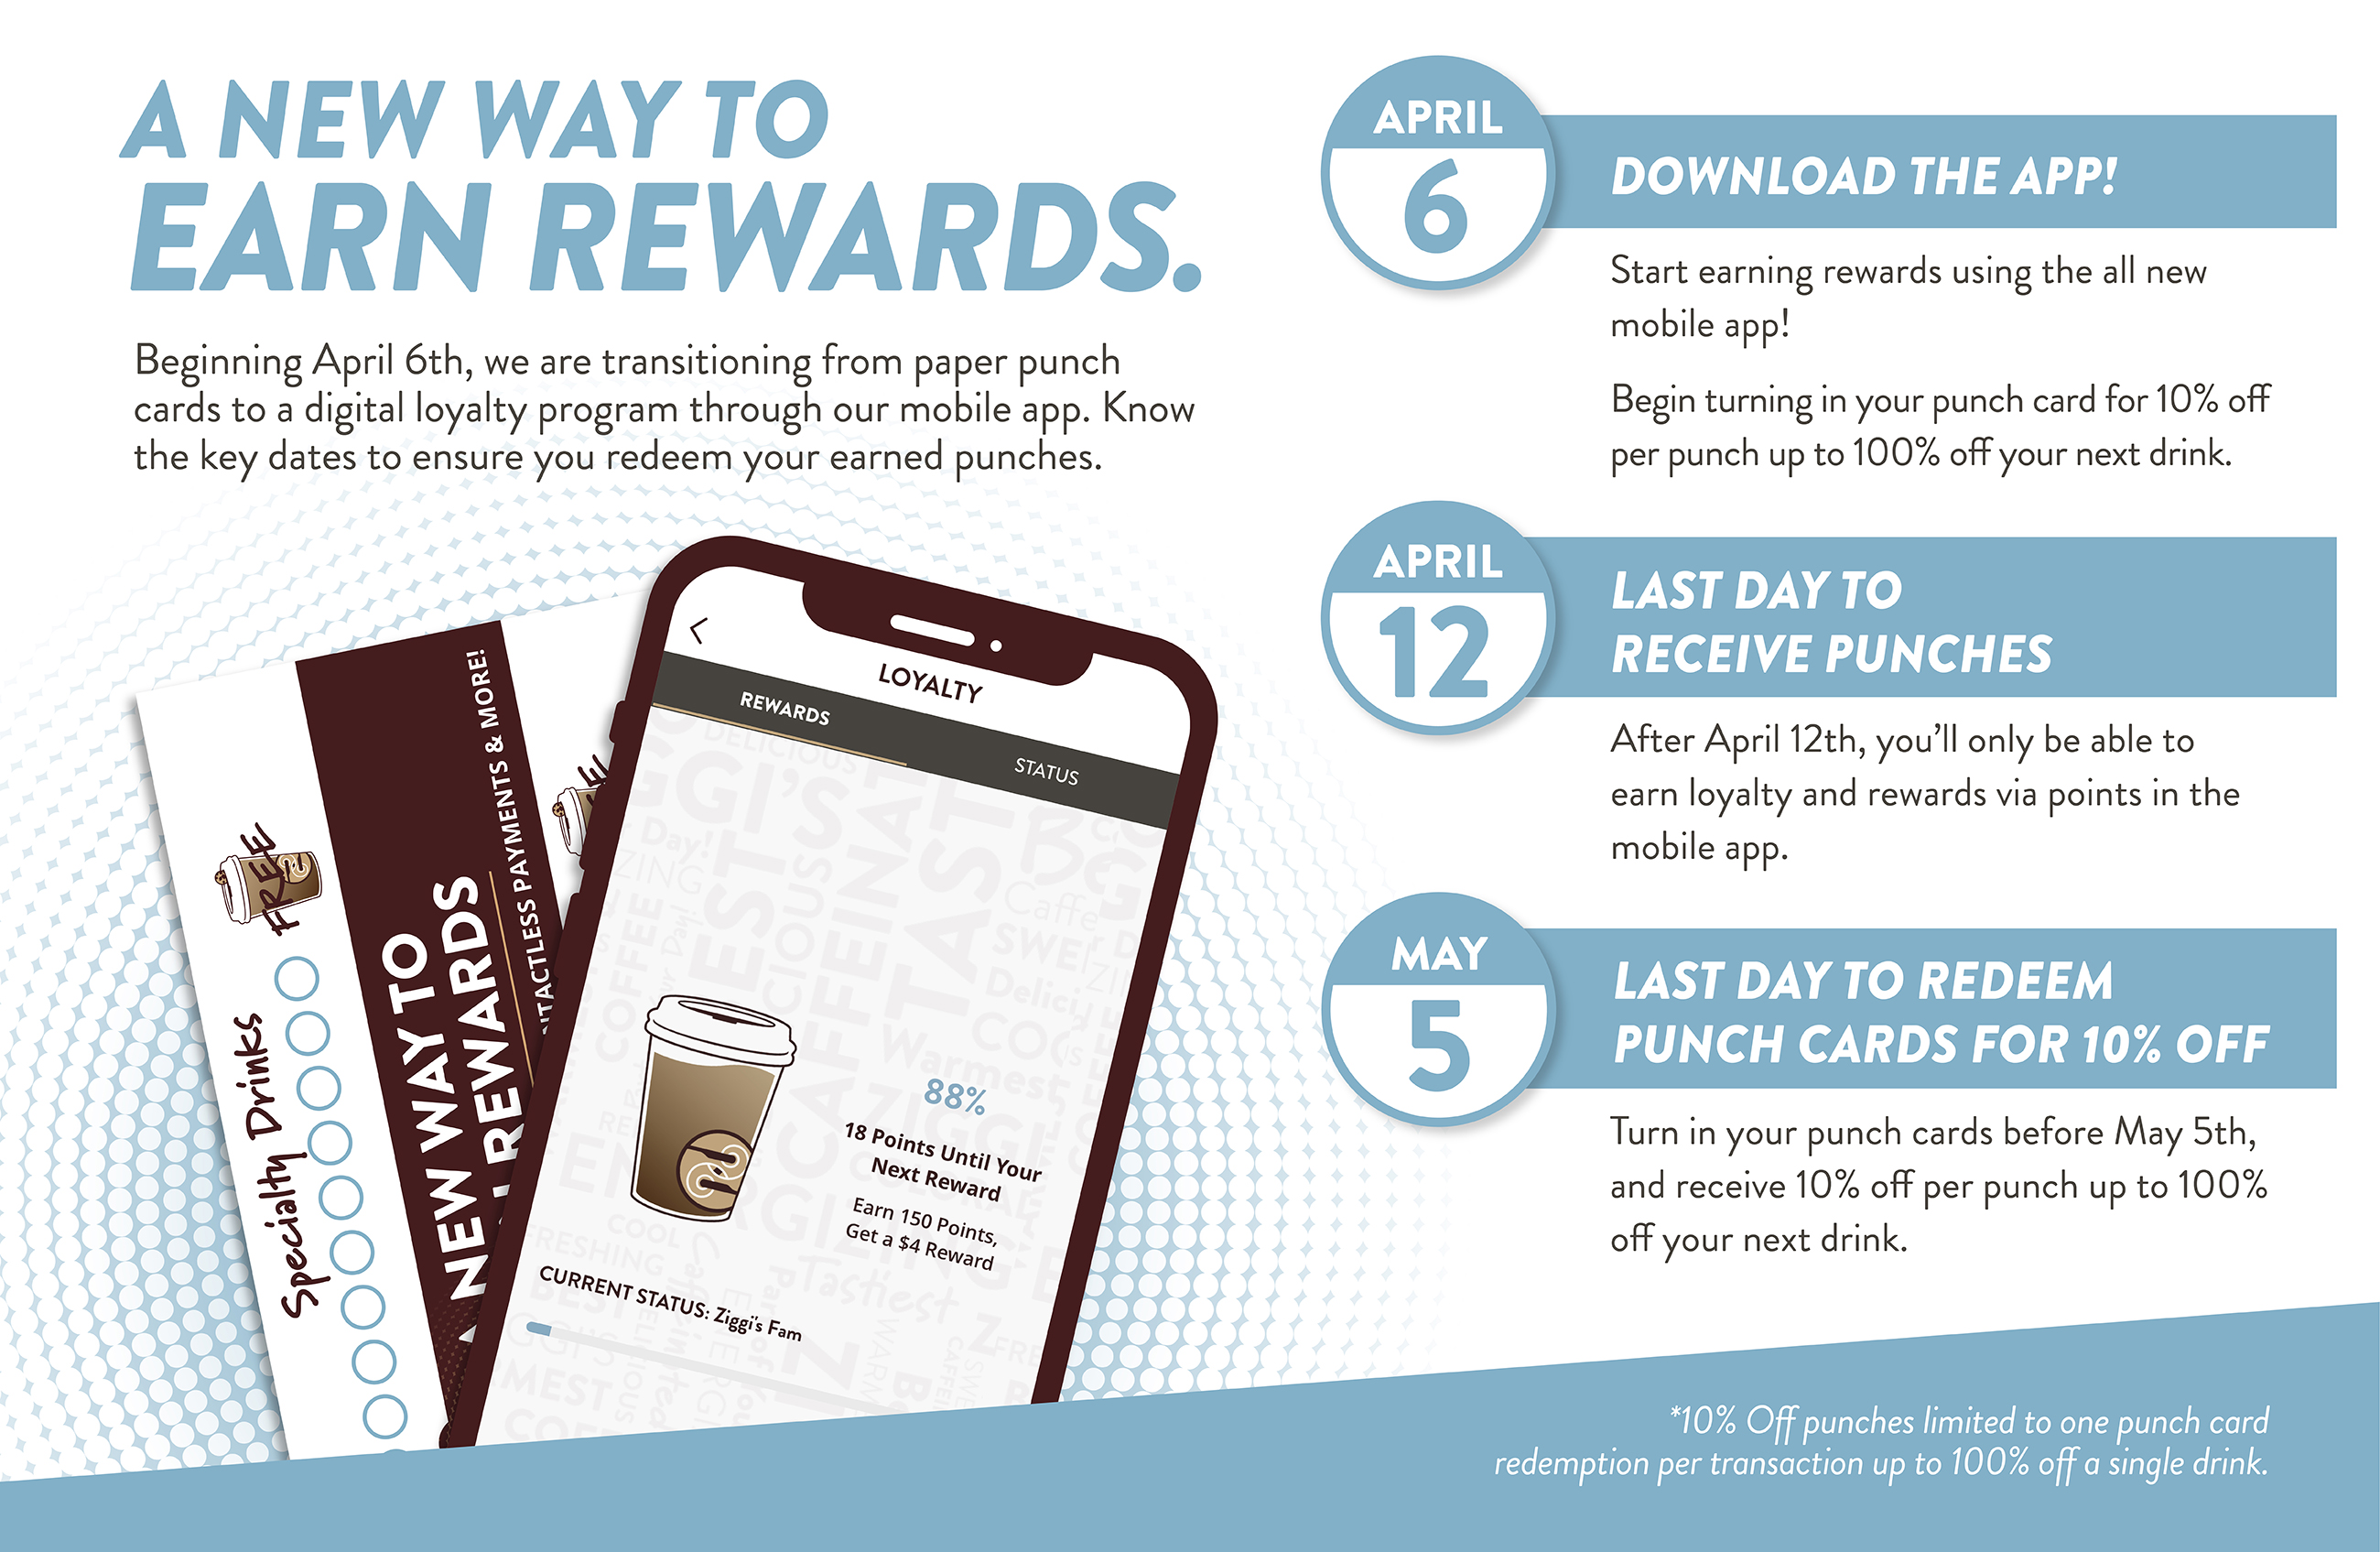 A new way to earn rewards. Beginning April 6th, we are transitioning from our paper punch cards to a digital loyalty program through our mobile app. You can begin turning in your punch cards for 10% off per punch up to 100% off. April 12th is your last day to receive punches and can transition to the app. 